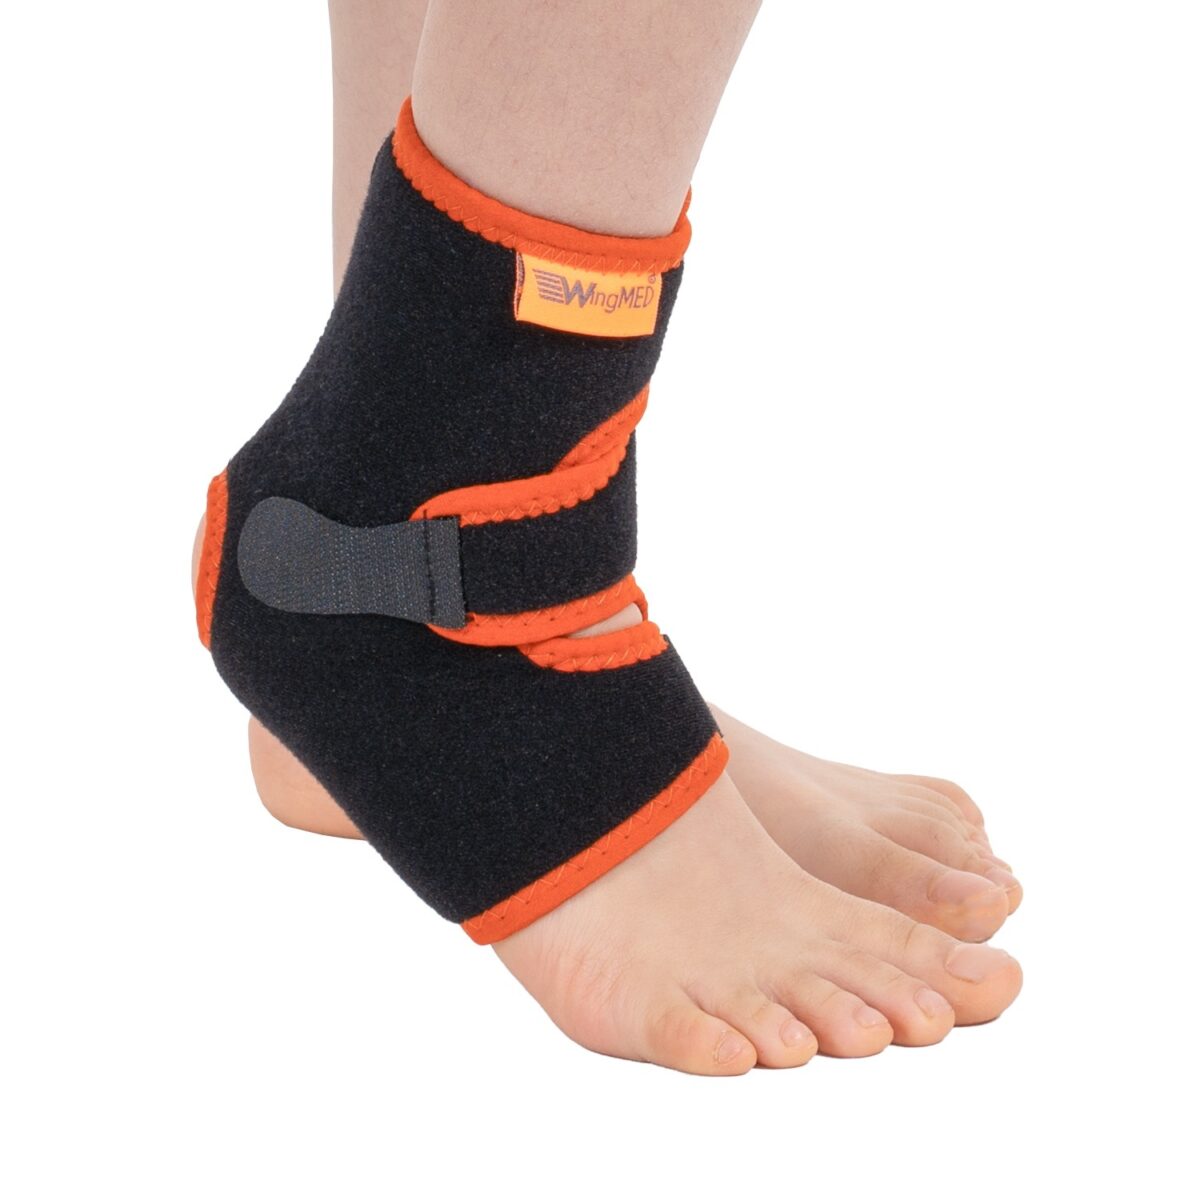 wingmed orthopedic equipments W920 ankle support with 8 strap 24